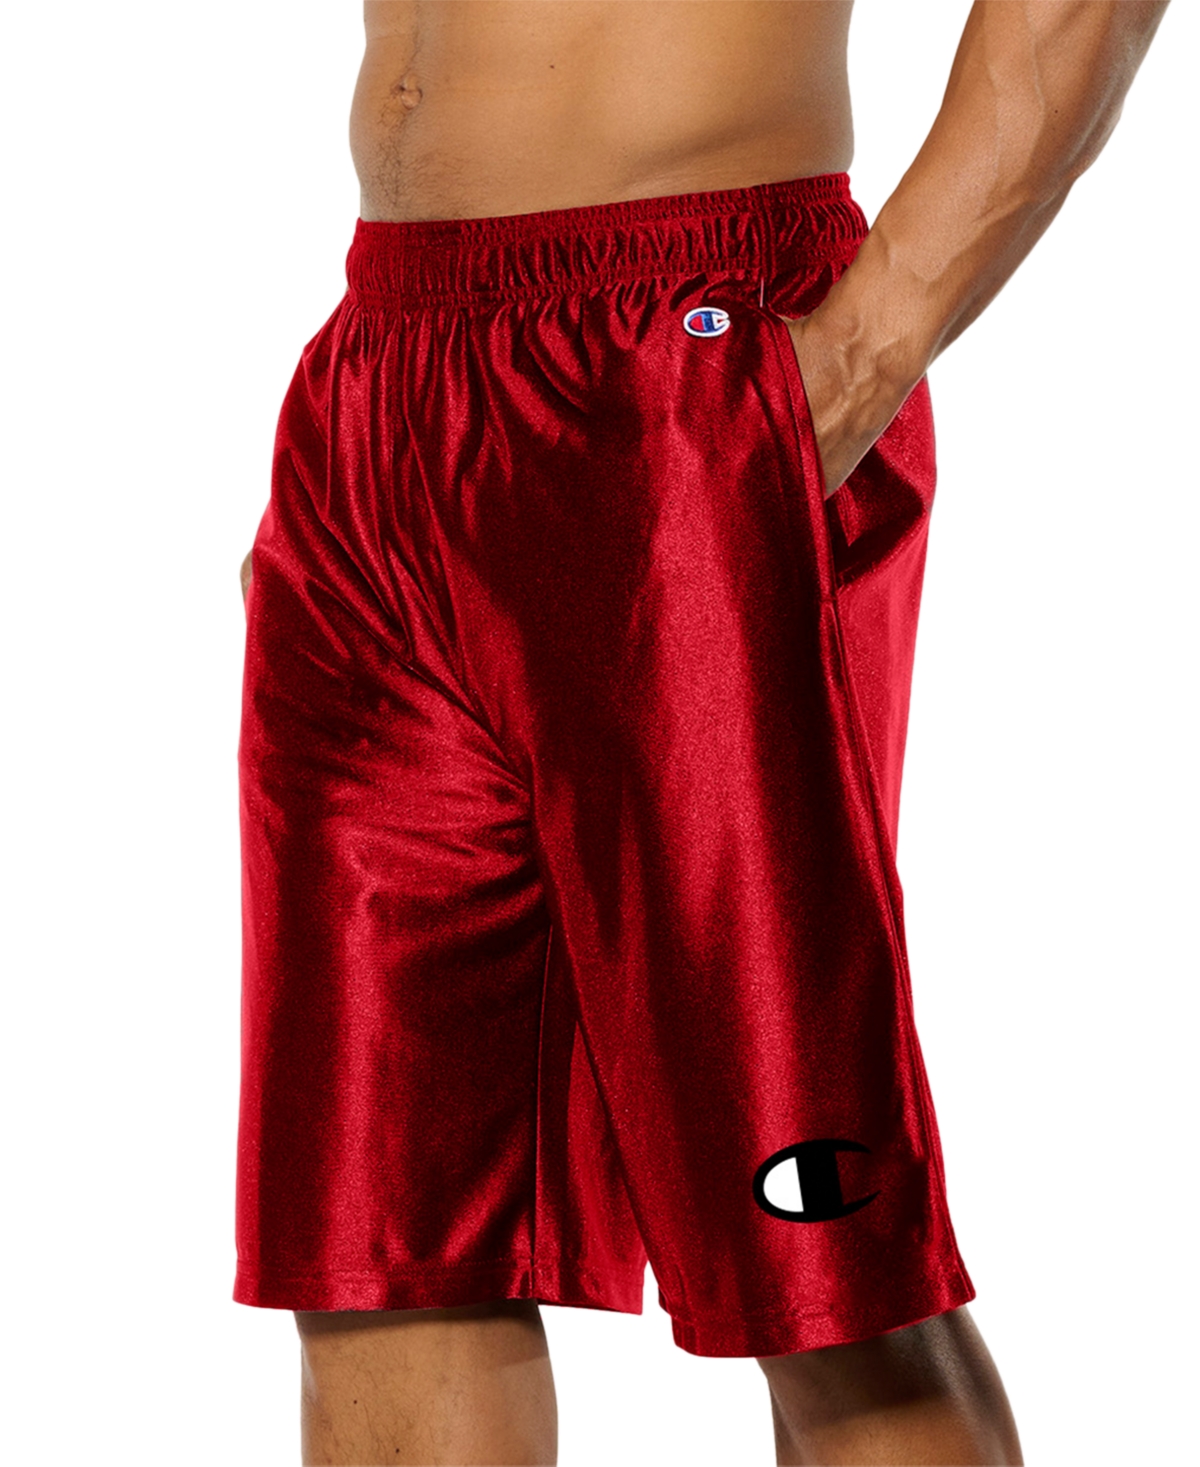 Red dazzle shorts